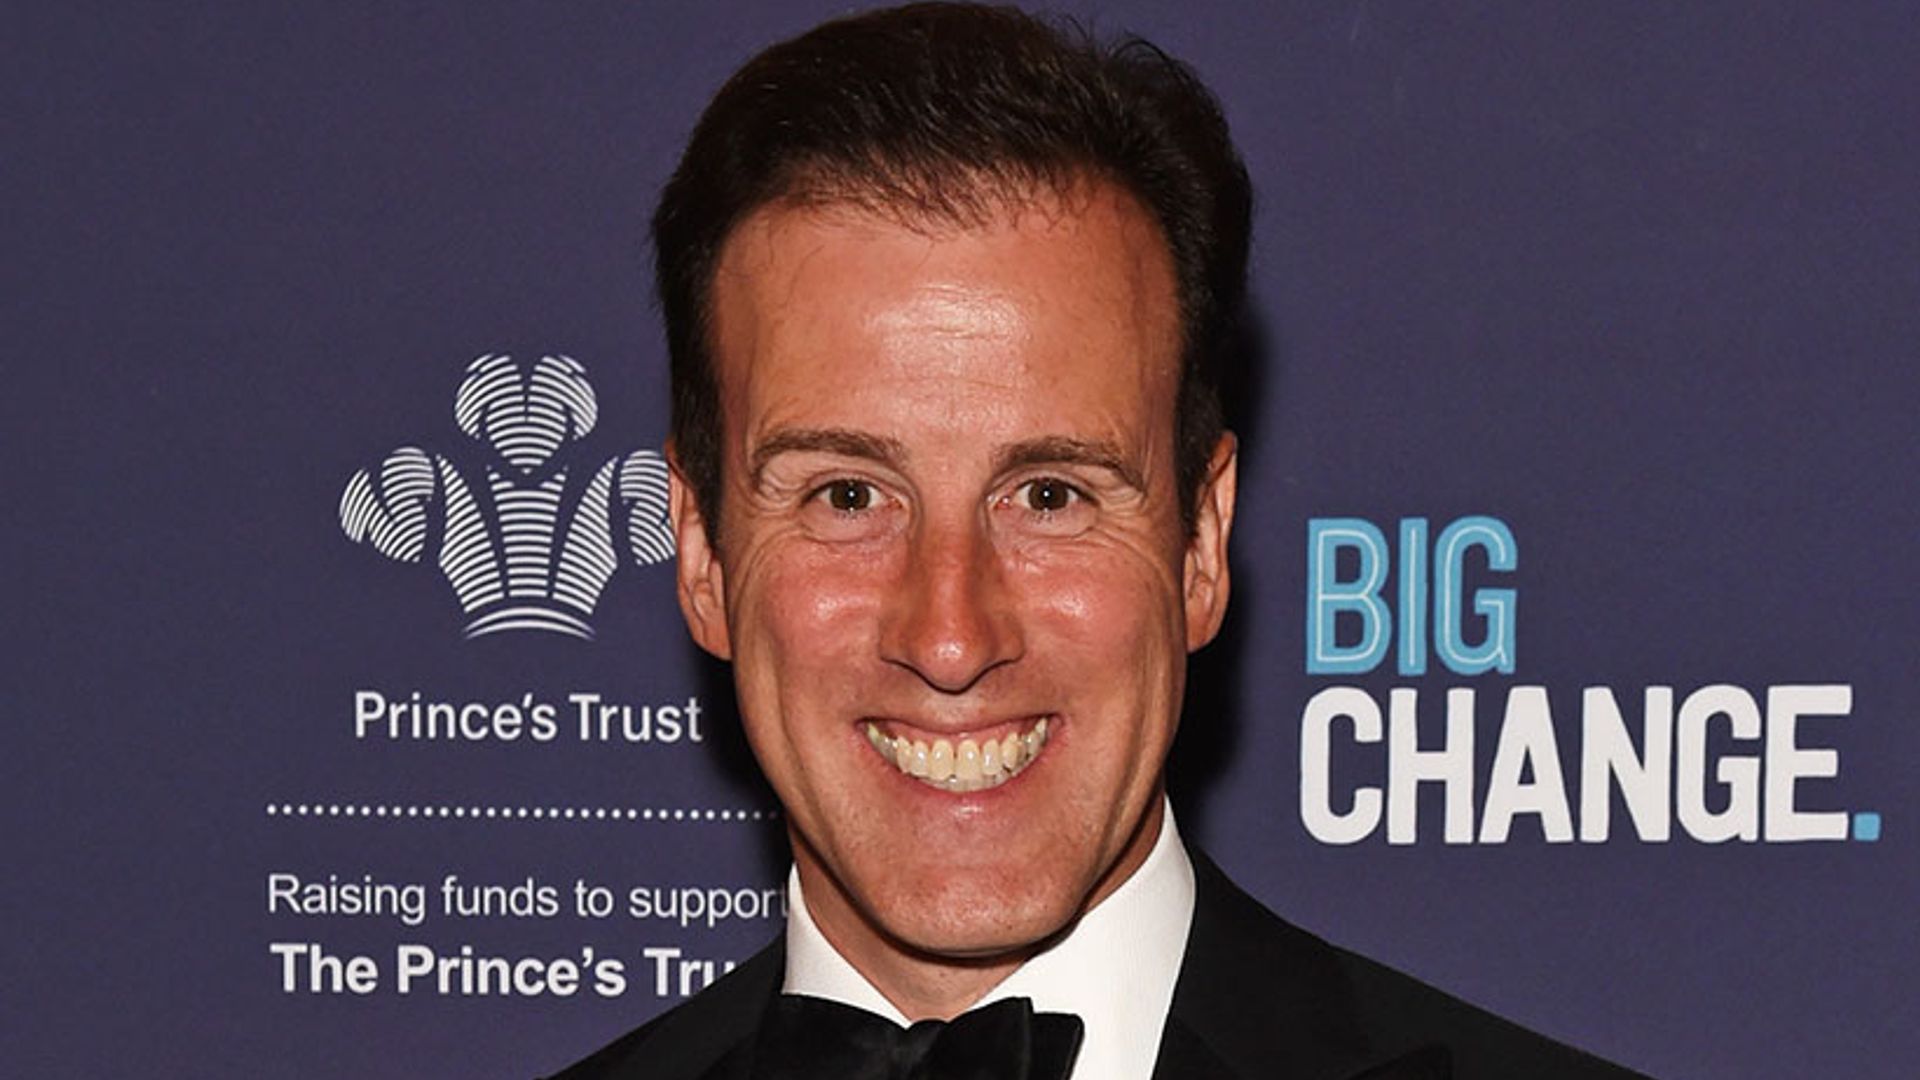 Anton Du Beke speaks about Strictly's head judge position: 'No one can replace Len Goodman'